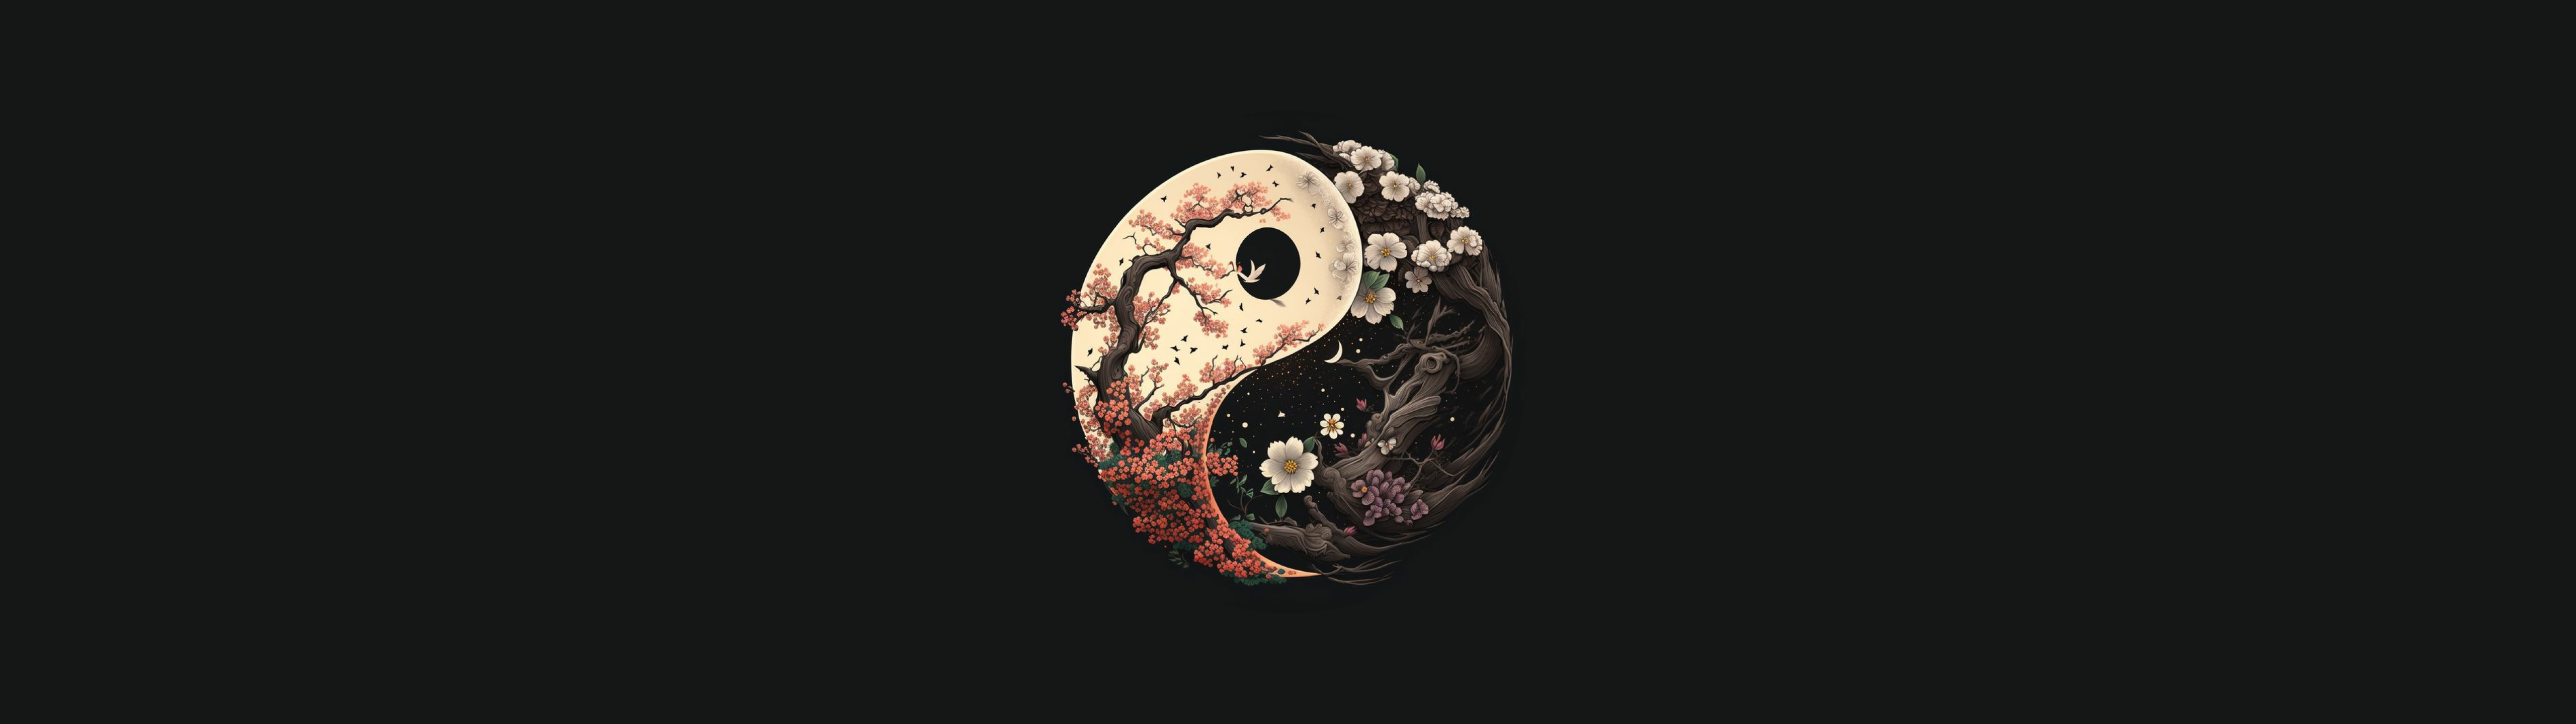 Nature Flowers Cherry Blossom Yin And Yang Trees Simple Background Black Background Minimalism Logo  5120x1440